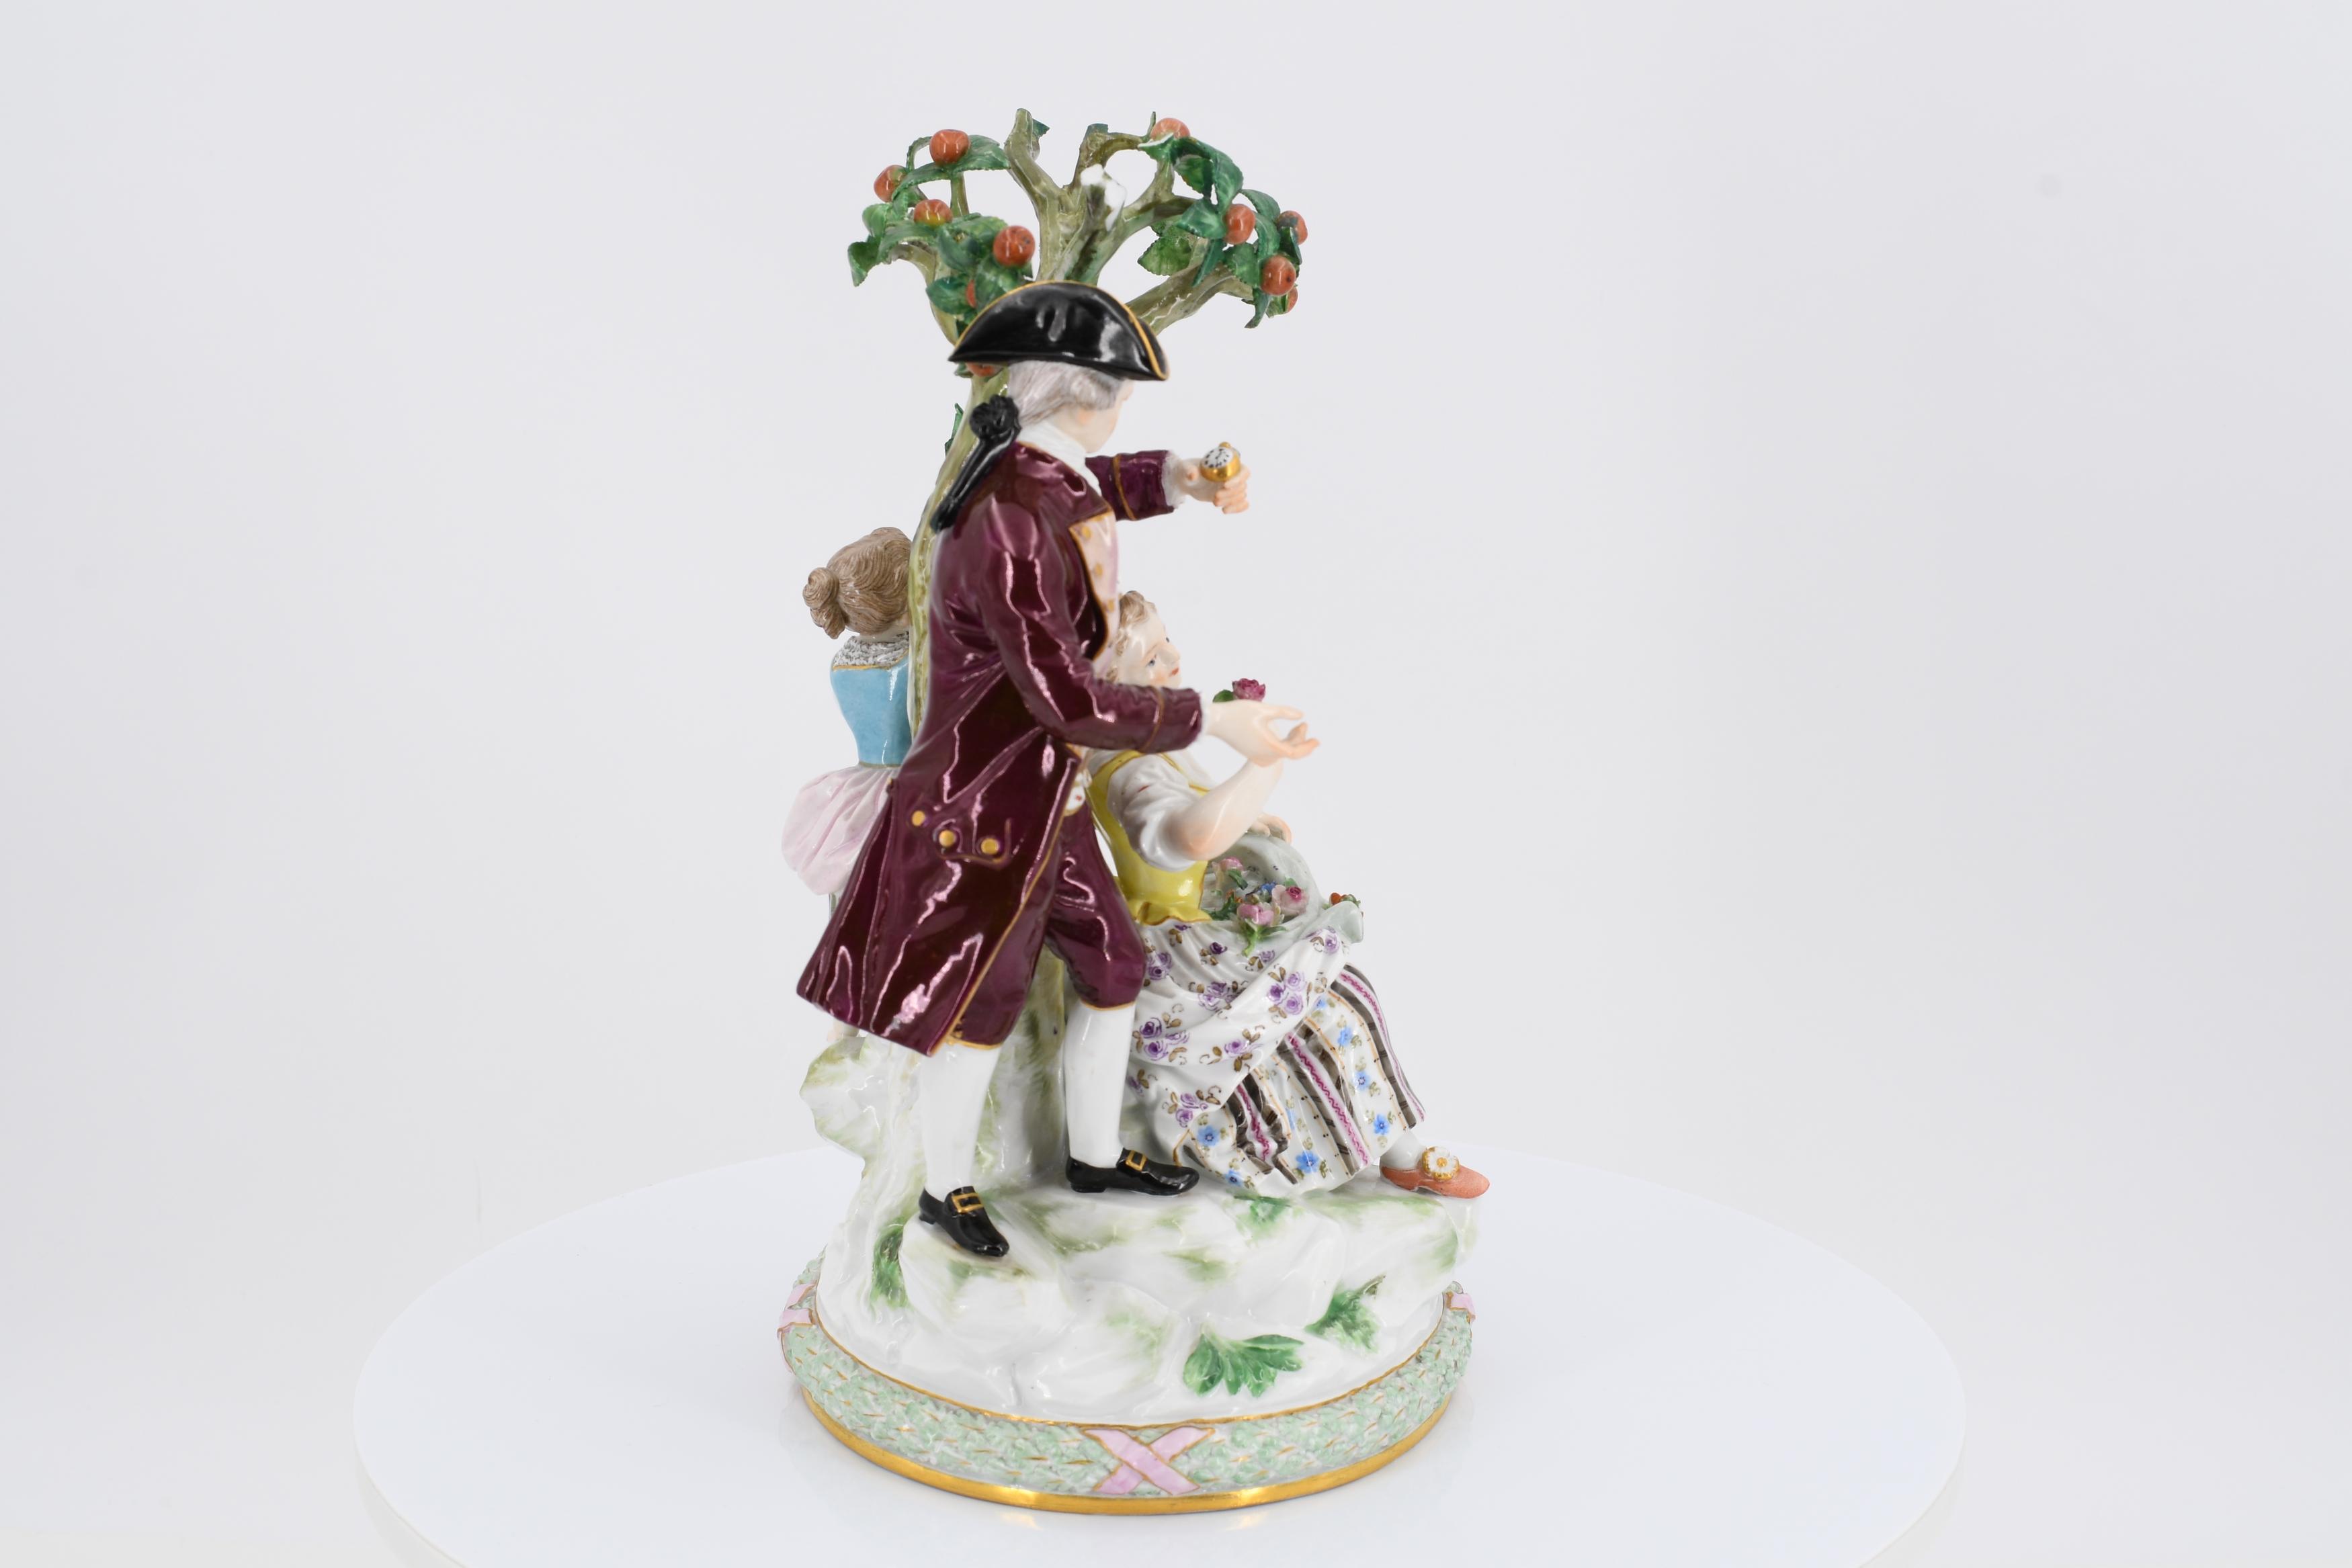 Porcelain ensemble of gardeners with an apple tree - Image 3 of 6